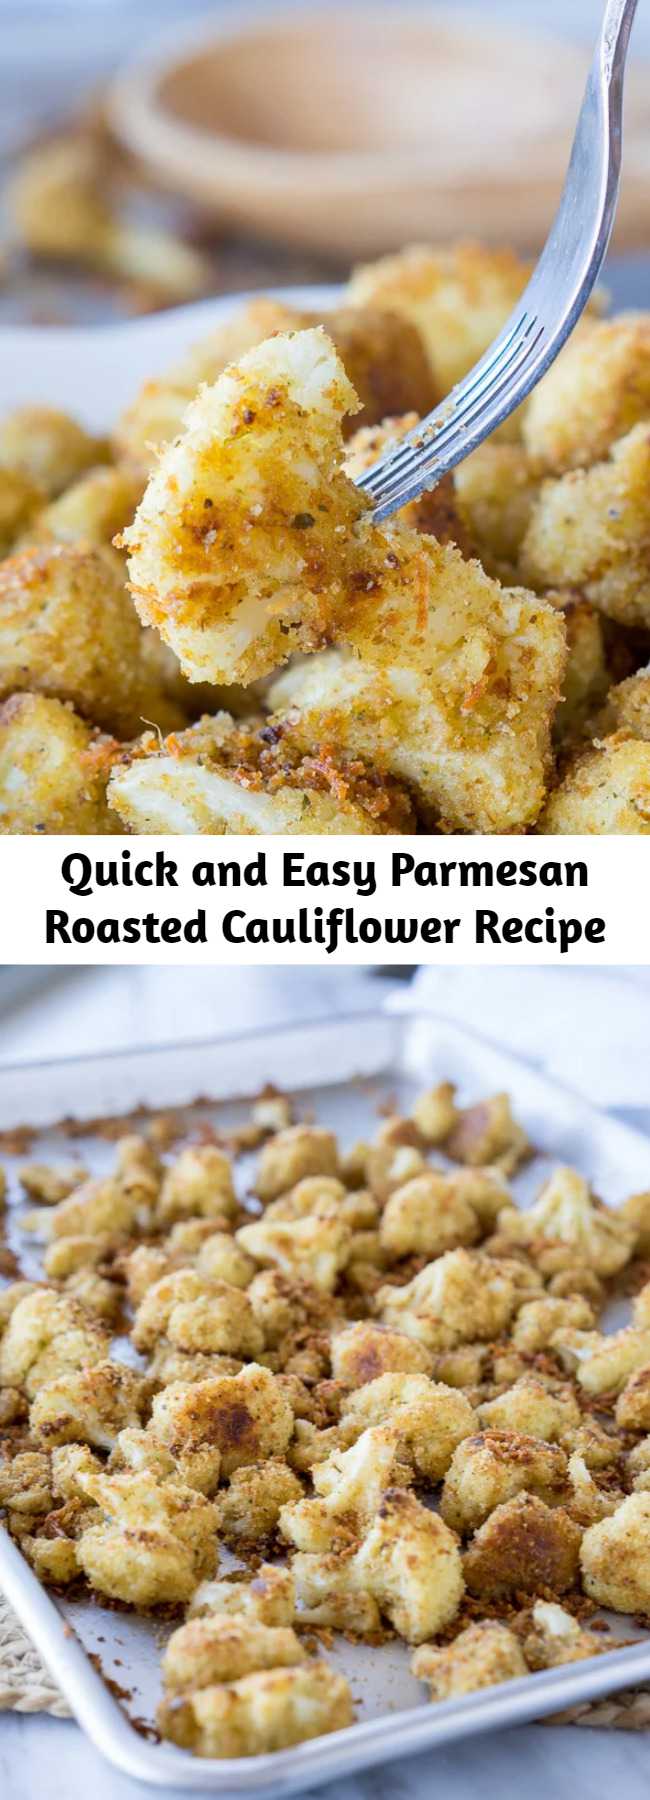 Quick and Easy Parmesan Roasted Cauliflower Recipe - These Parmesan Roasted Cauliflower Bites are the perfect quick and easy side dish, or double as a vegetarian baked chicken nugget!